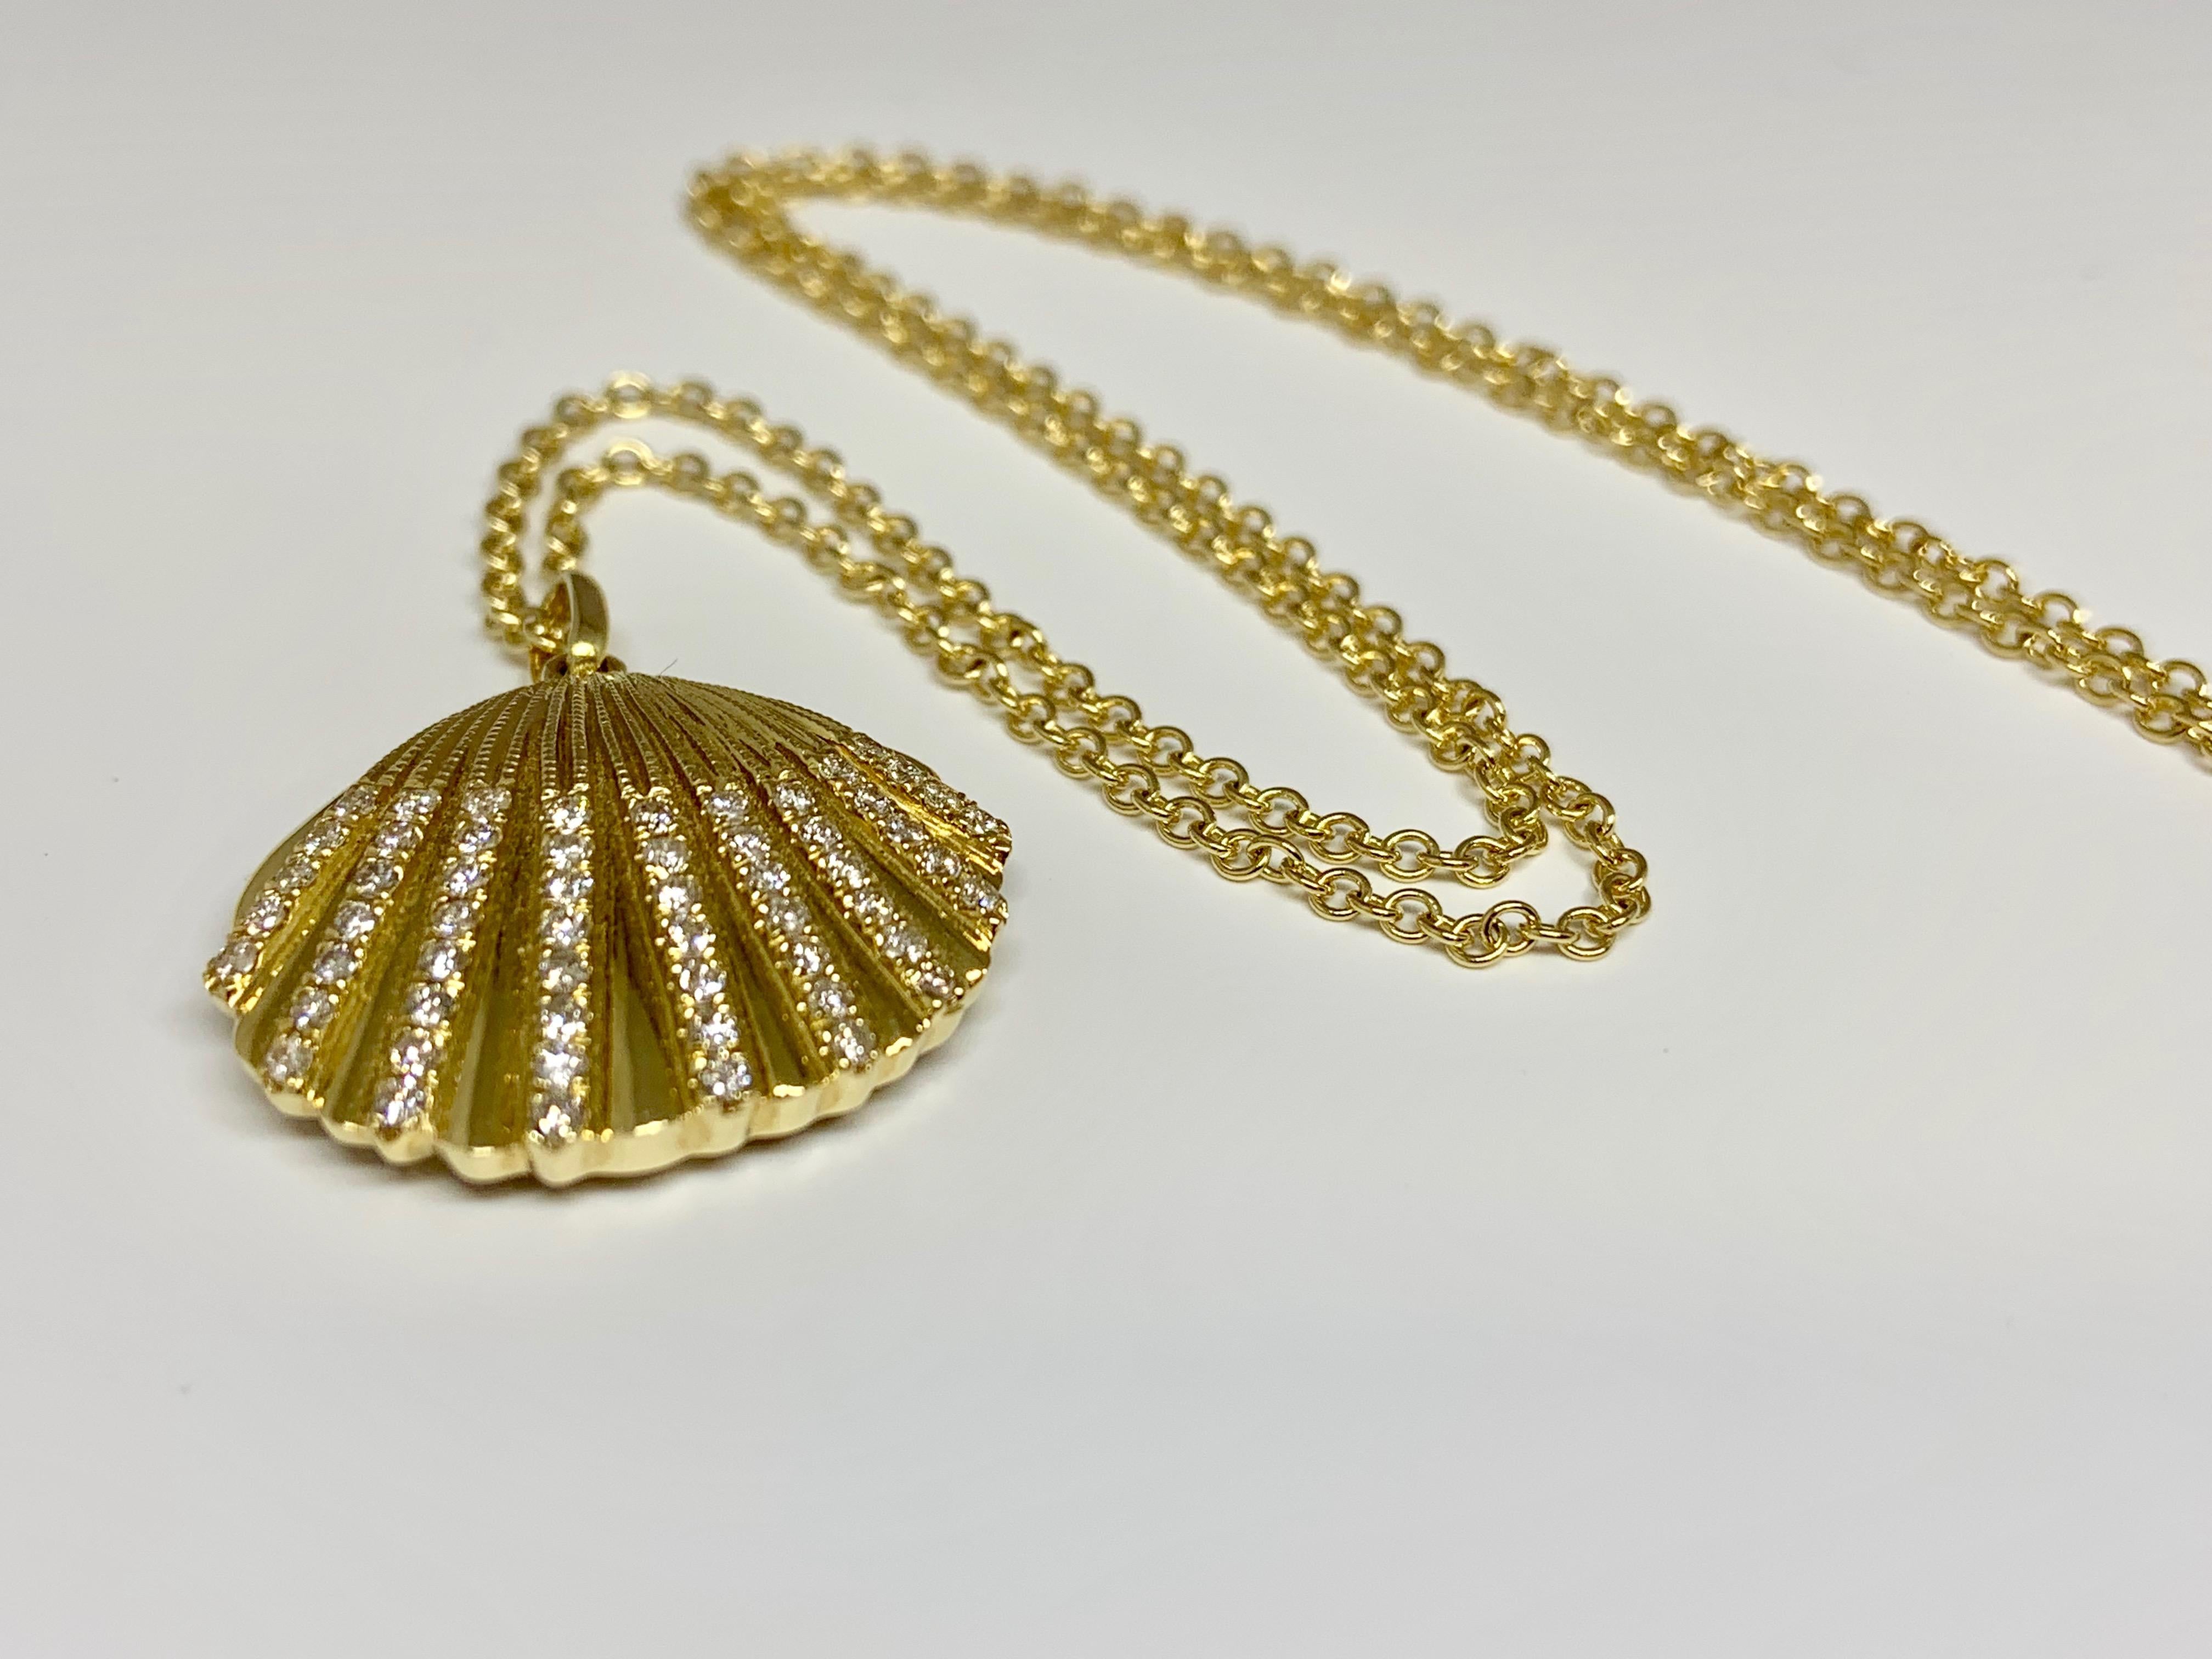 This Cherie Dori Seashell Necklace features 0.43 carats of round diamond accents as well as gorgeous milgrain and high polish textures. This necklace includes a 14K yellow gold 18